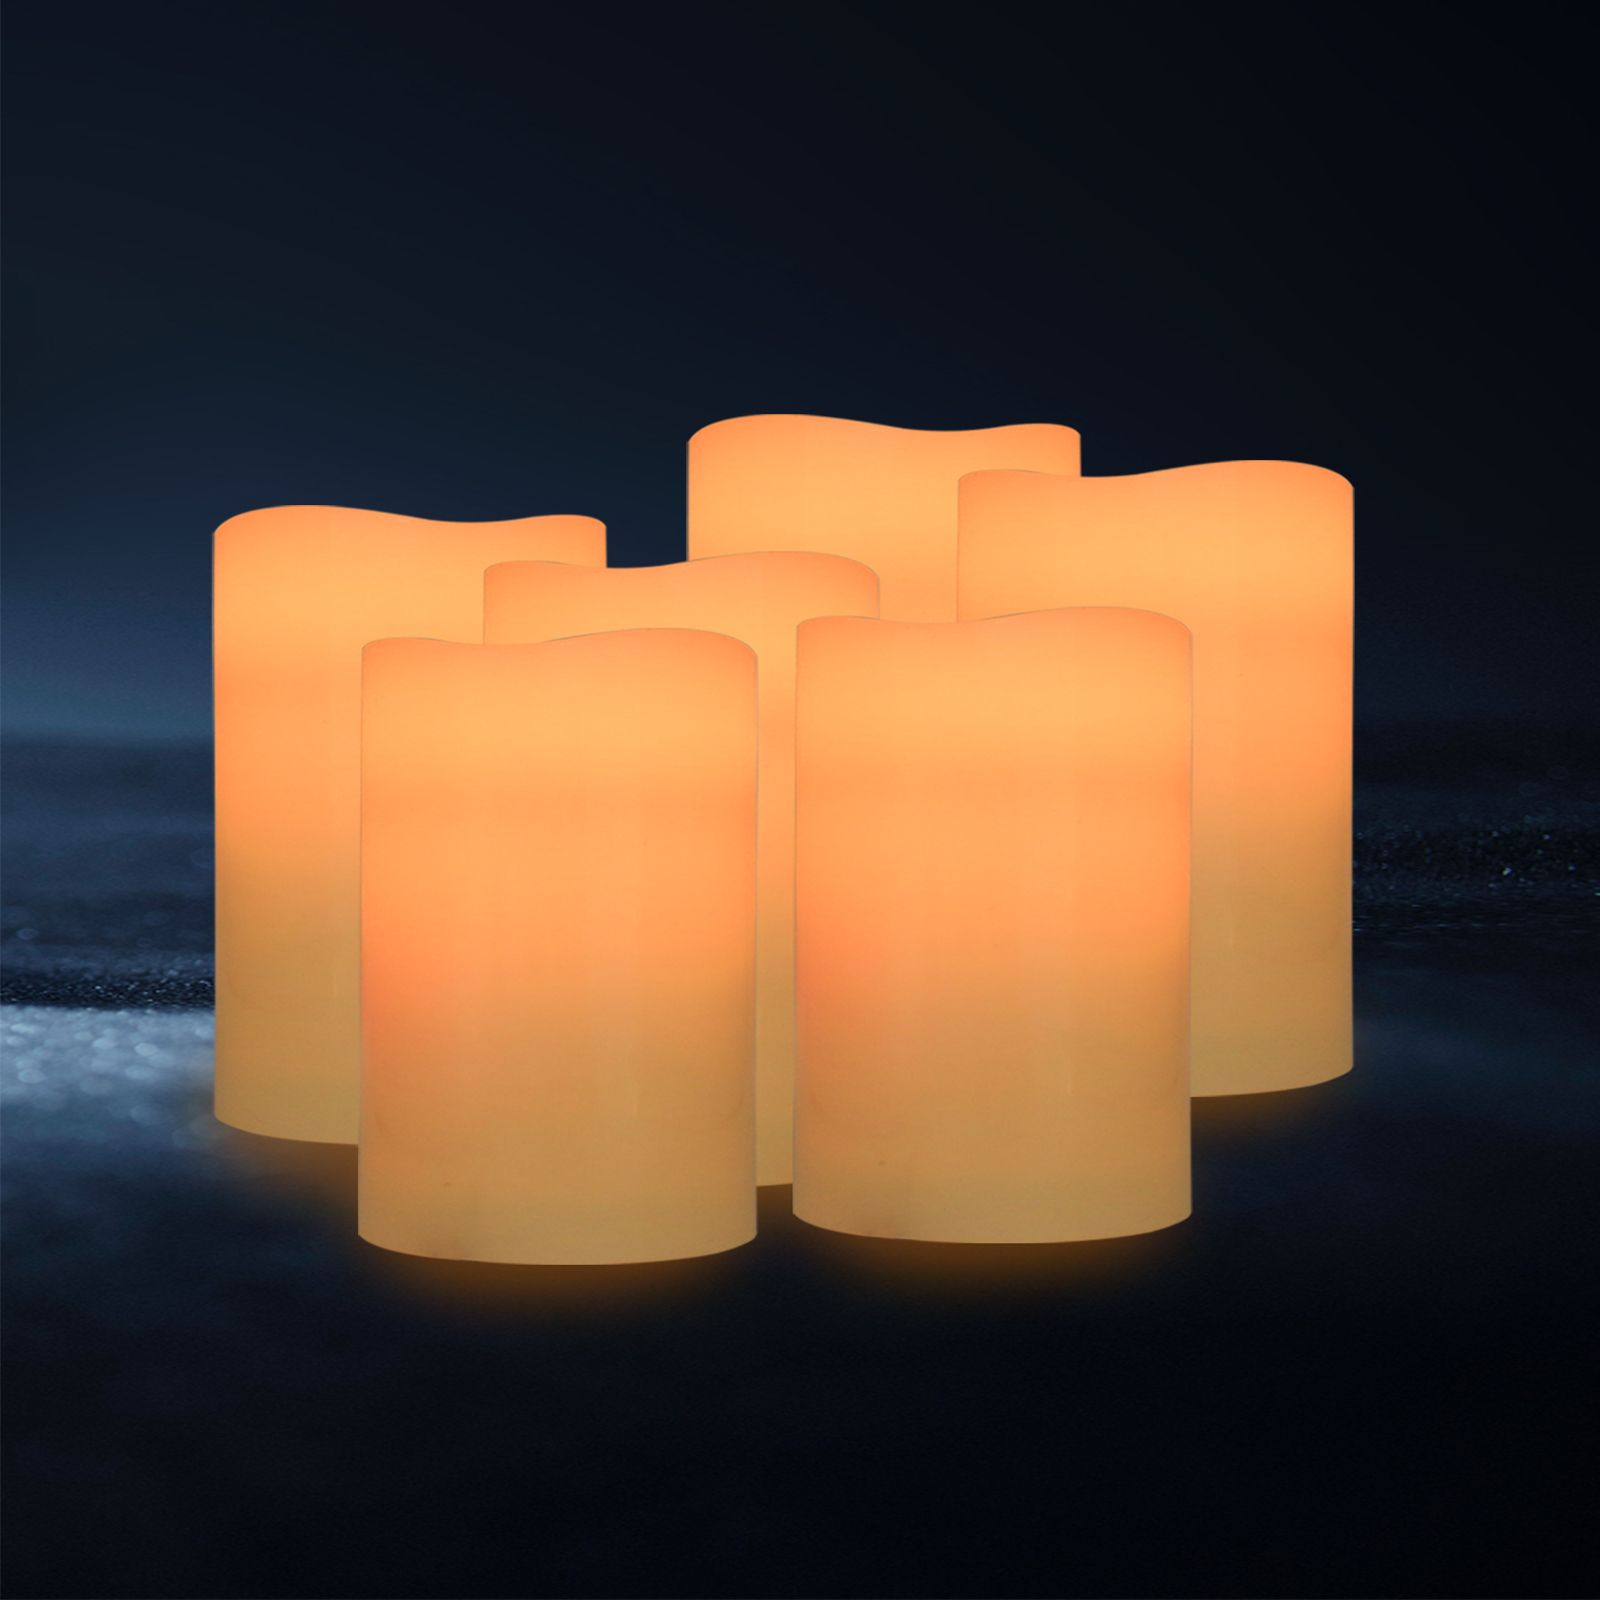 6 Candles With Audio